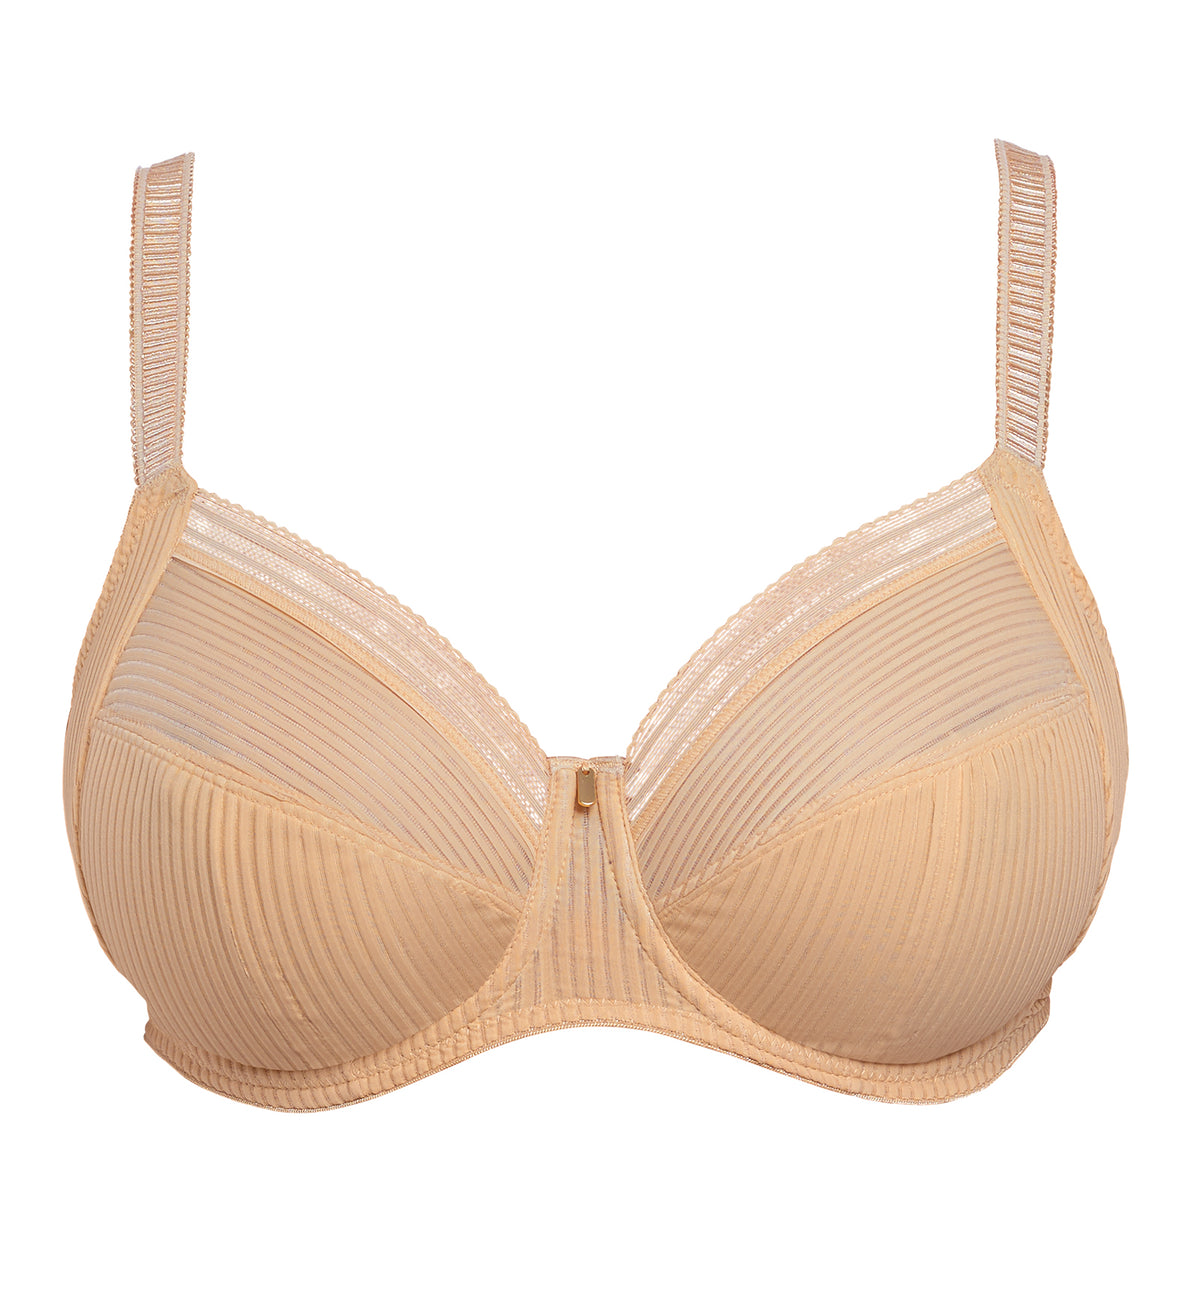 Fantasie Fusion Full Cup Side Support Underwire Bra (3091),30F,Sand - Sand,30F